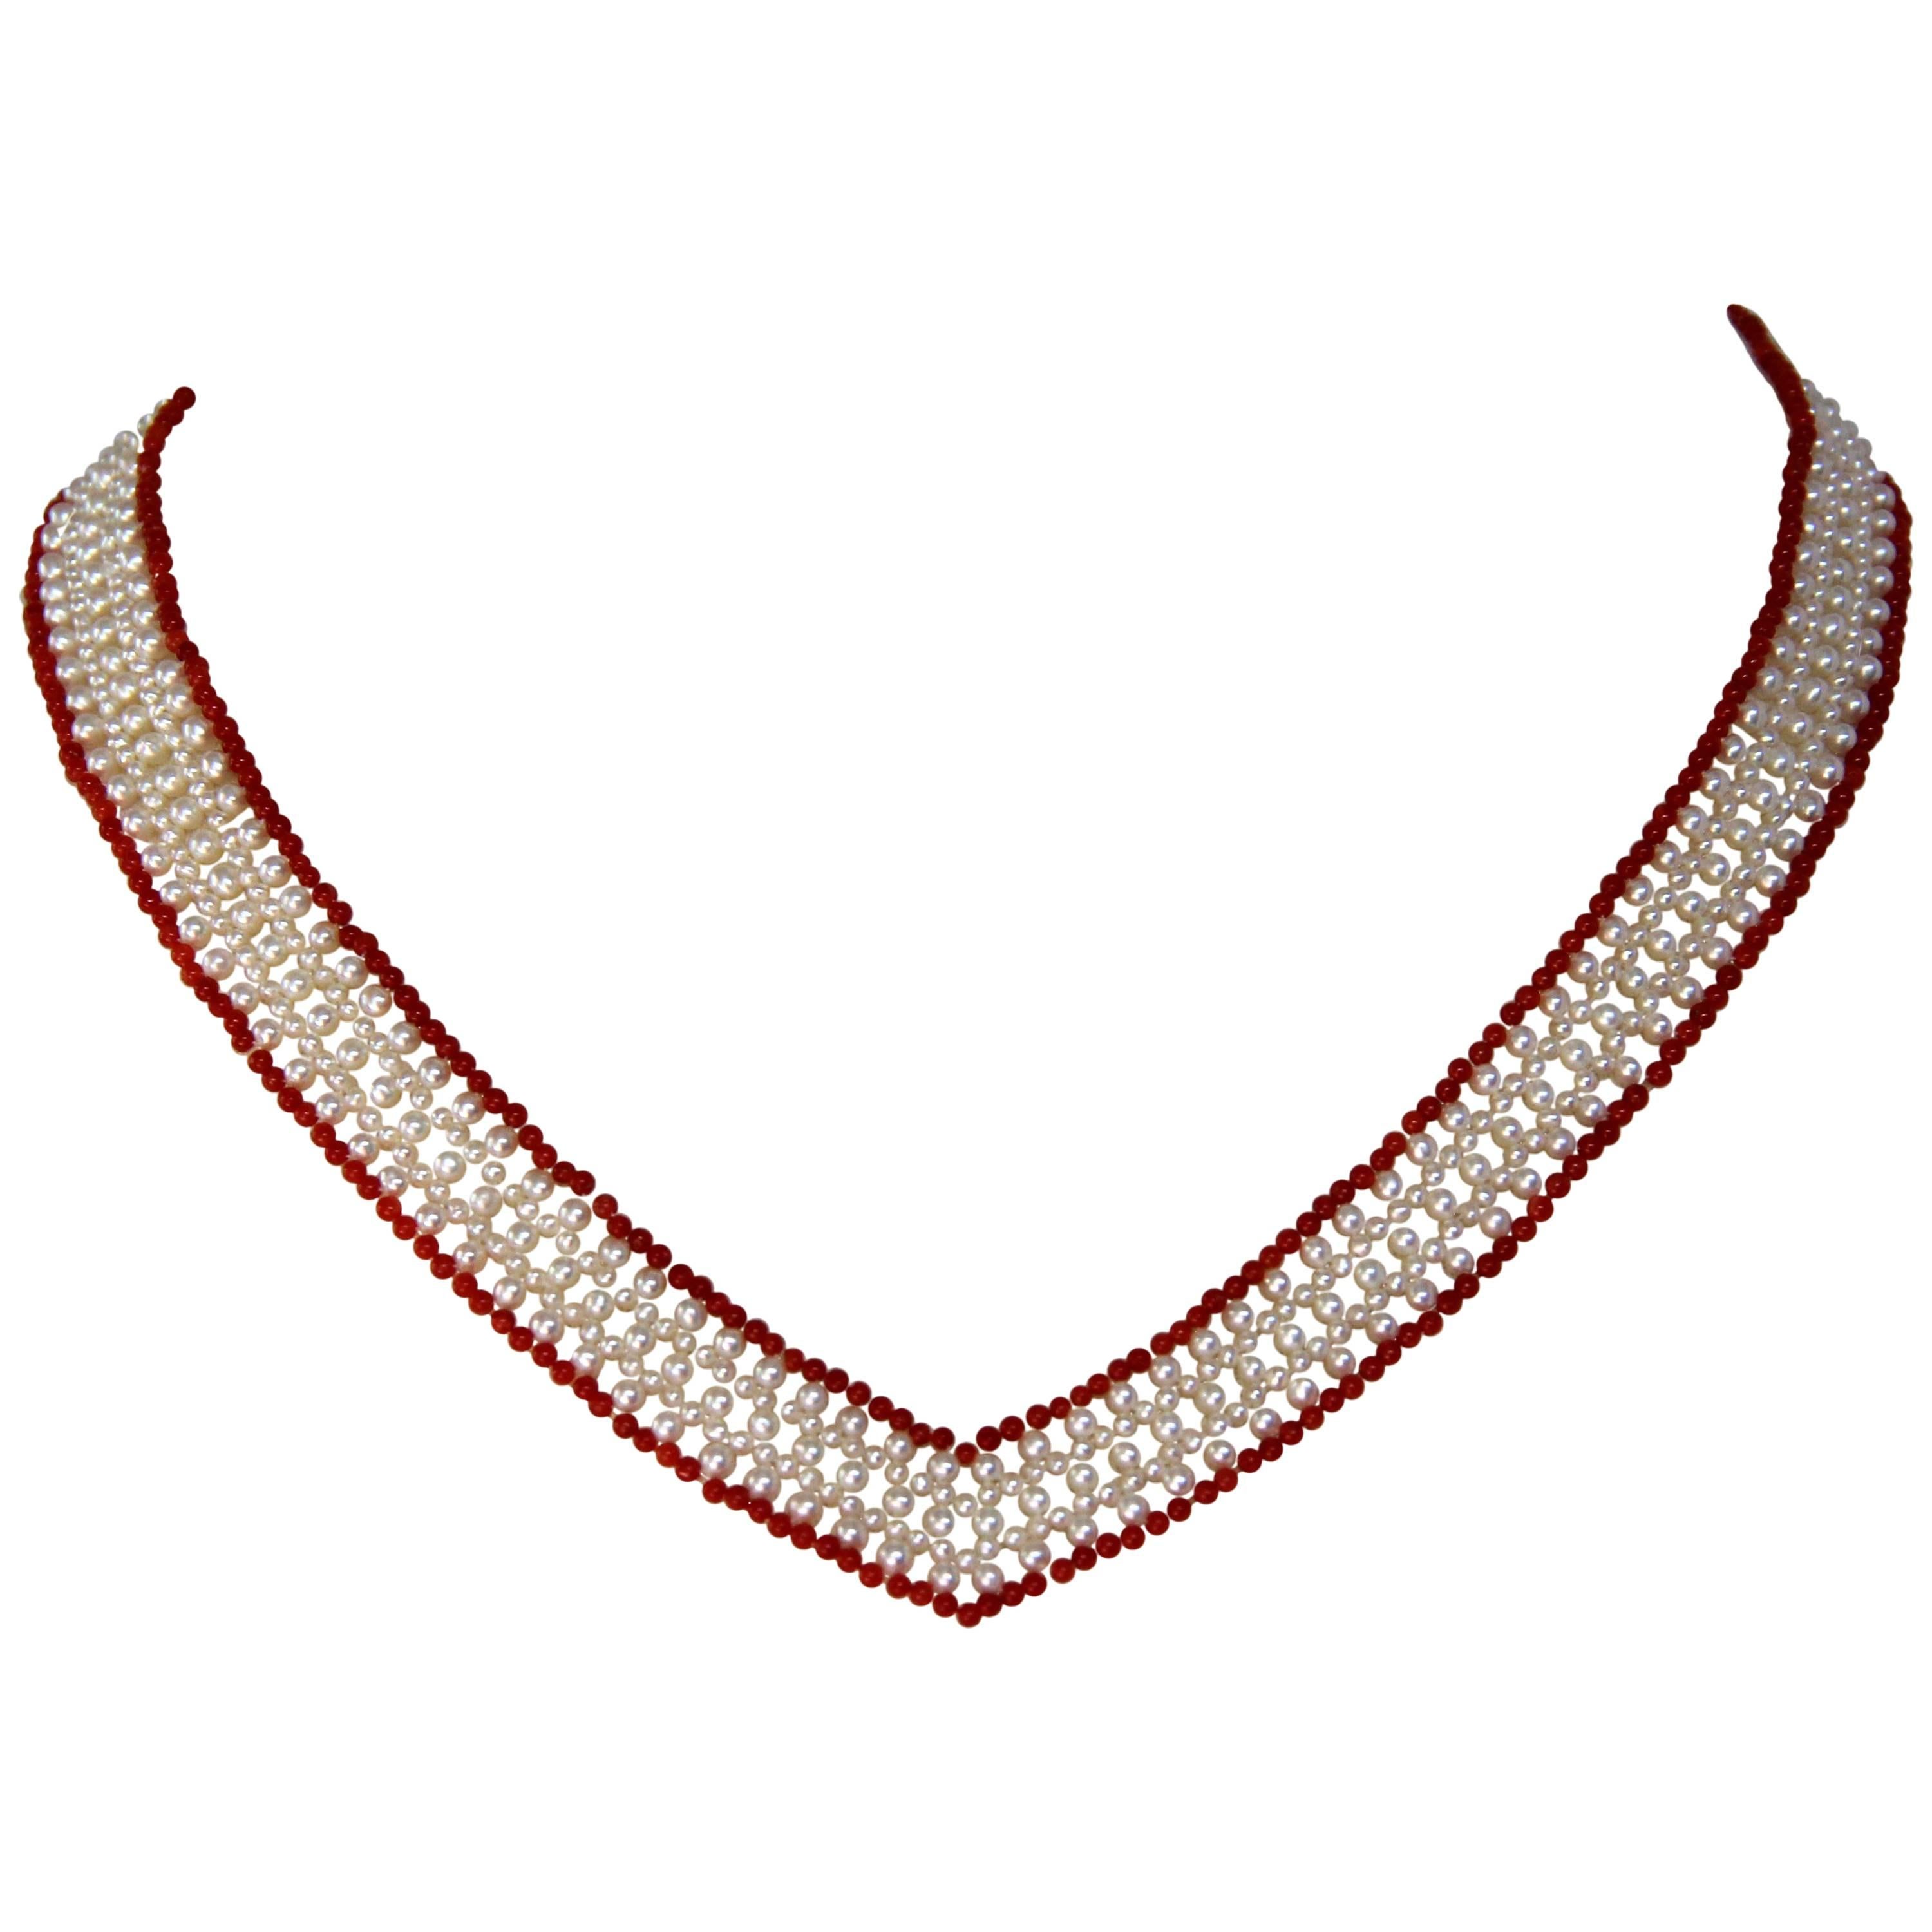 Marina J White Pearls and Red Coral Beads V Shape Necklace with 14 k yellow gold